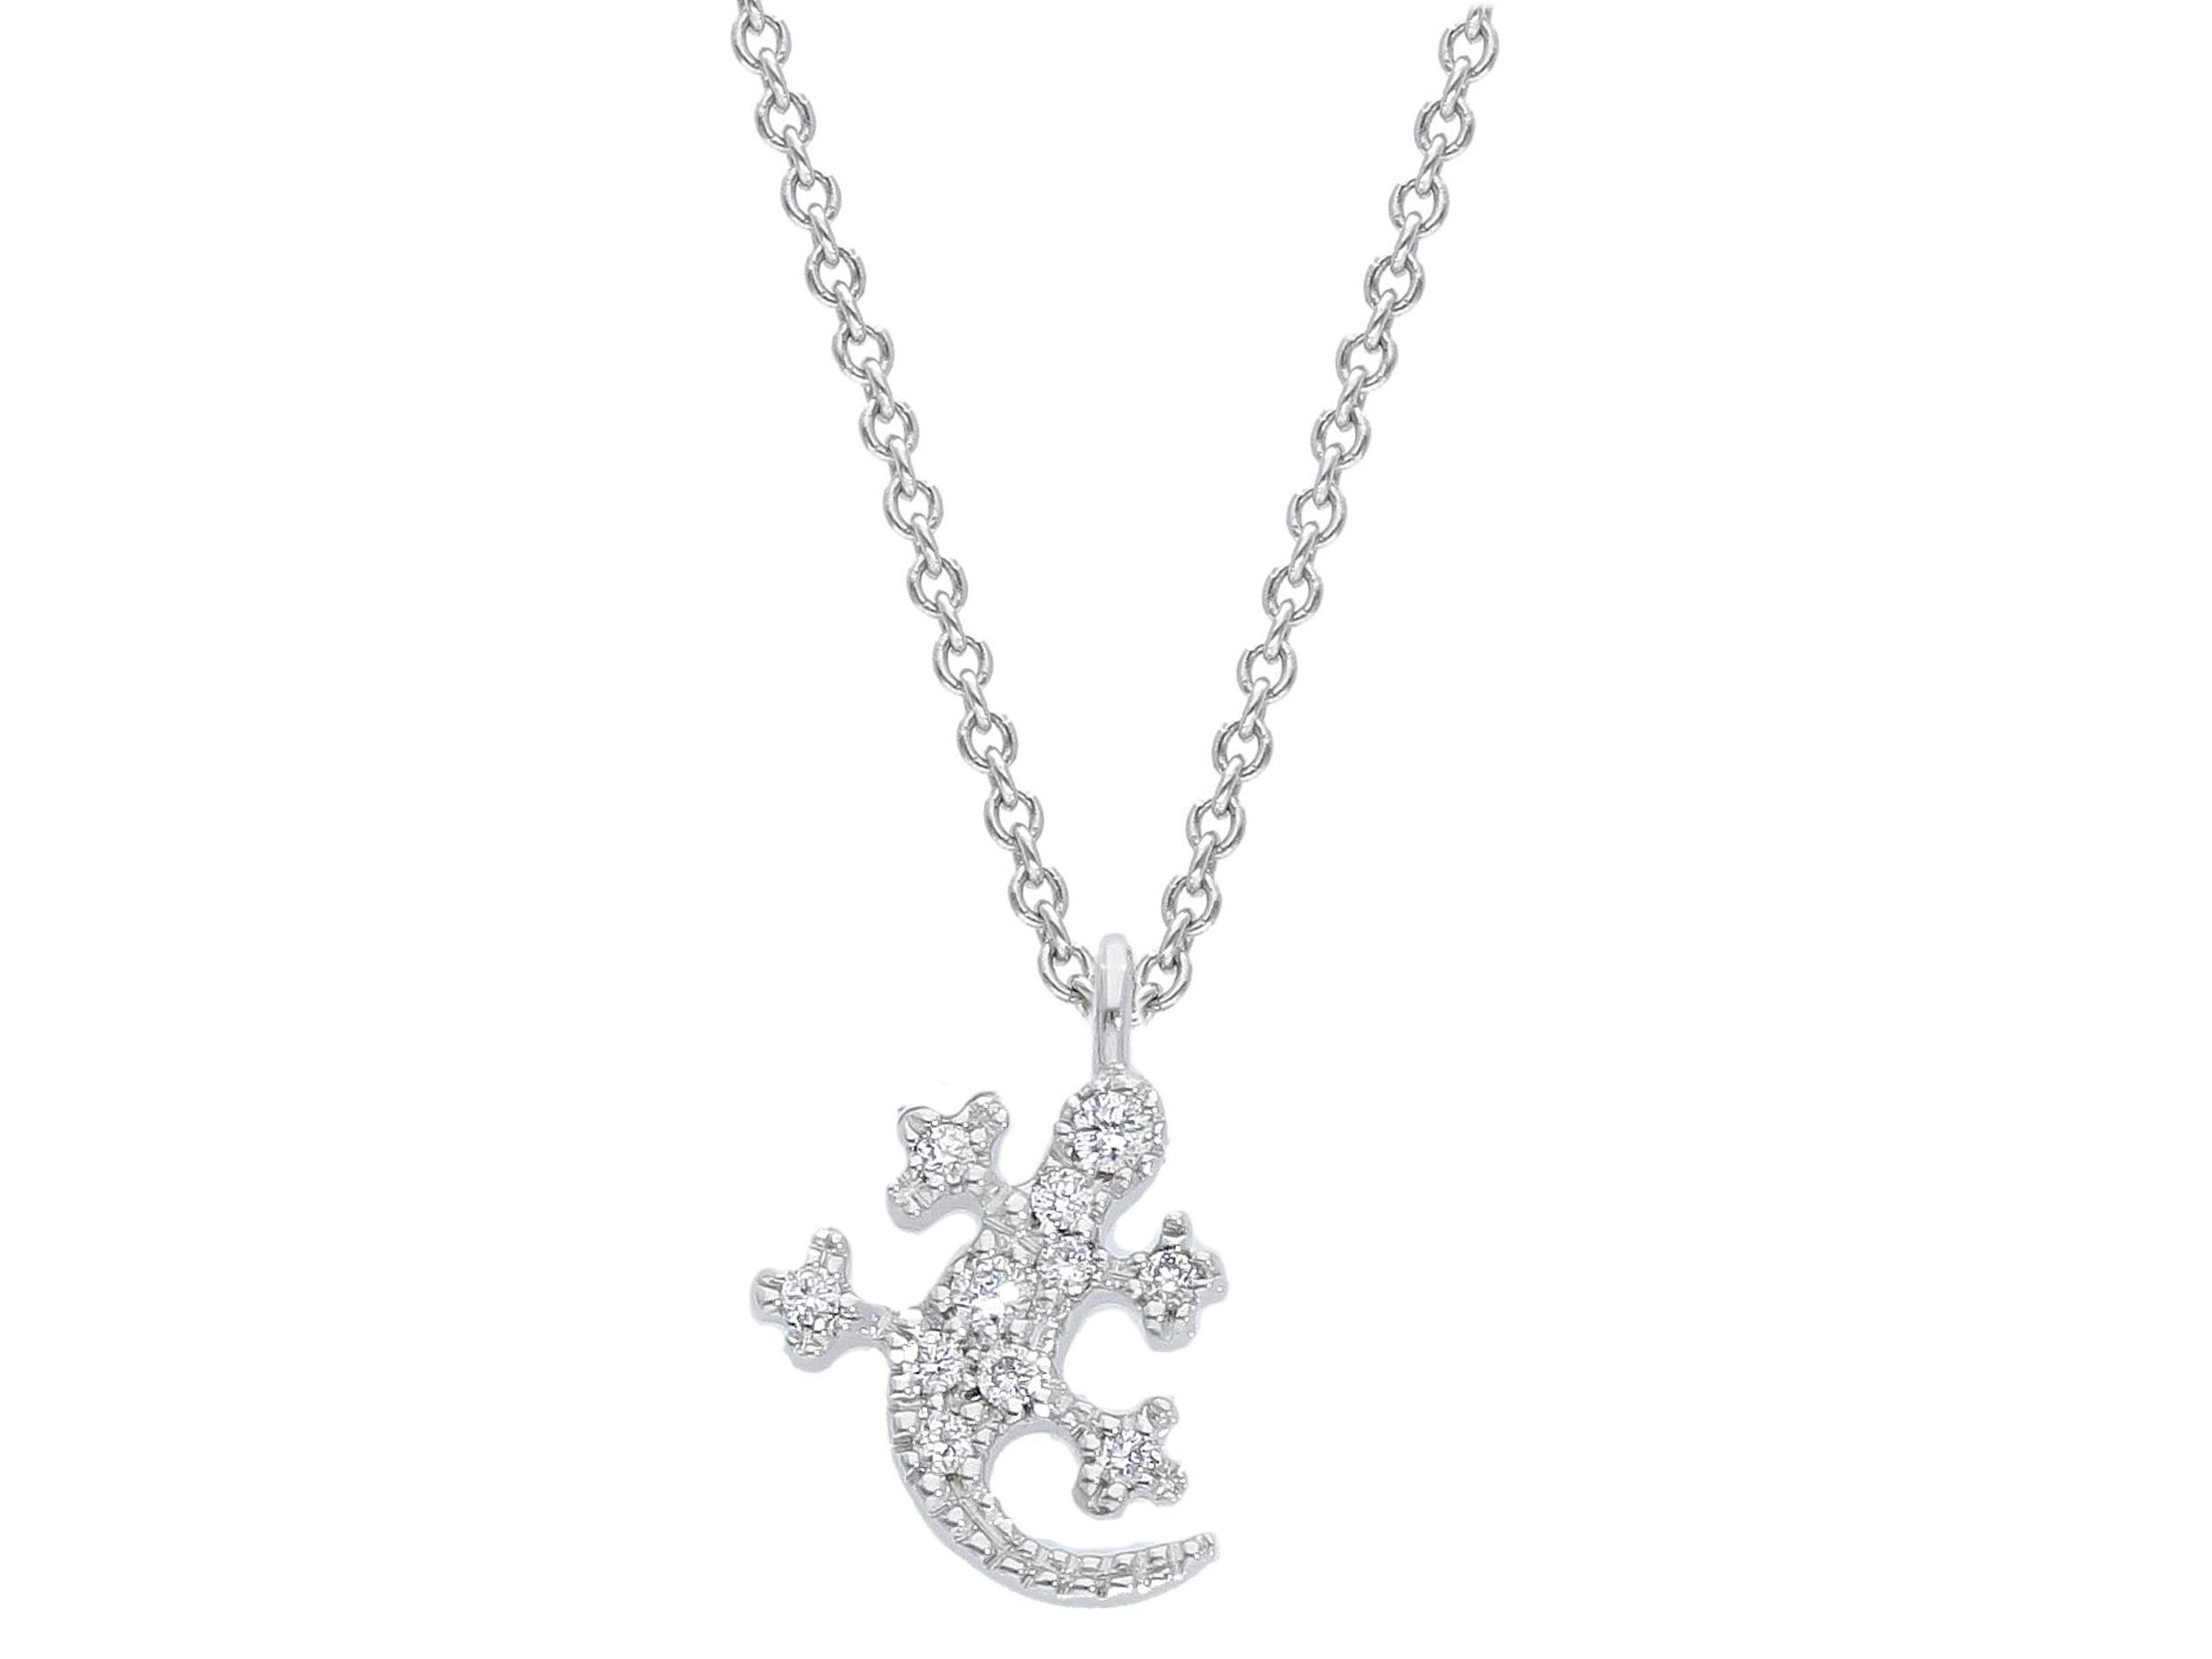  White gold necklace k18 with diamonds (code S176605)